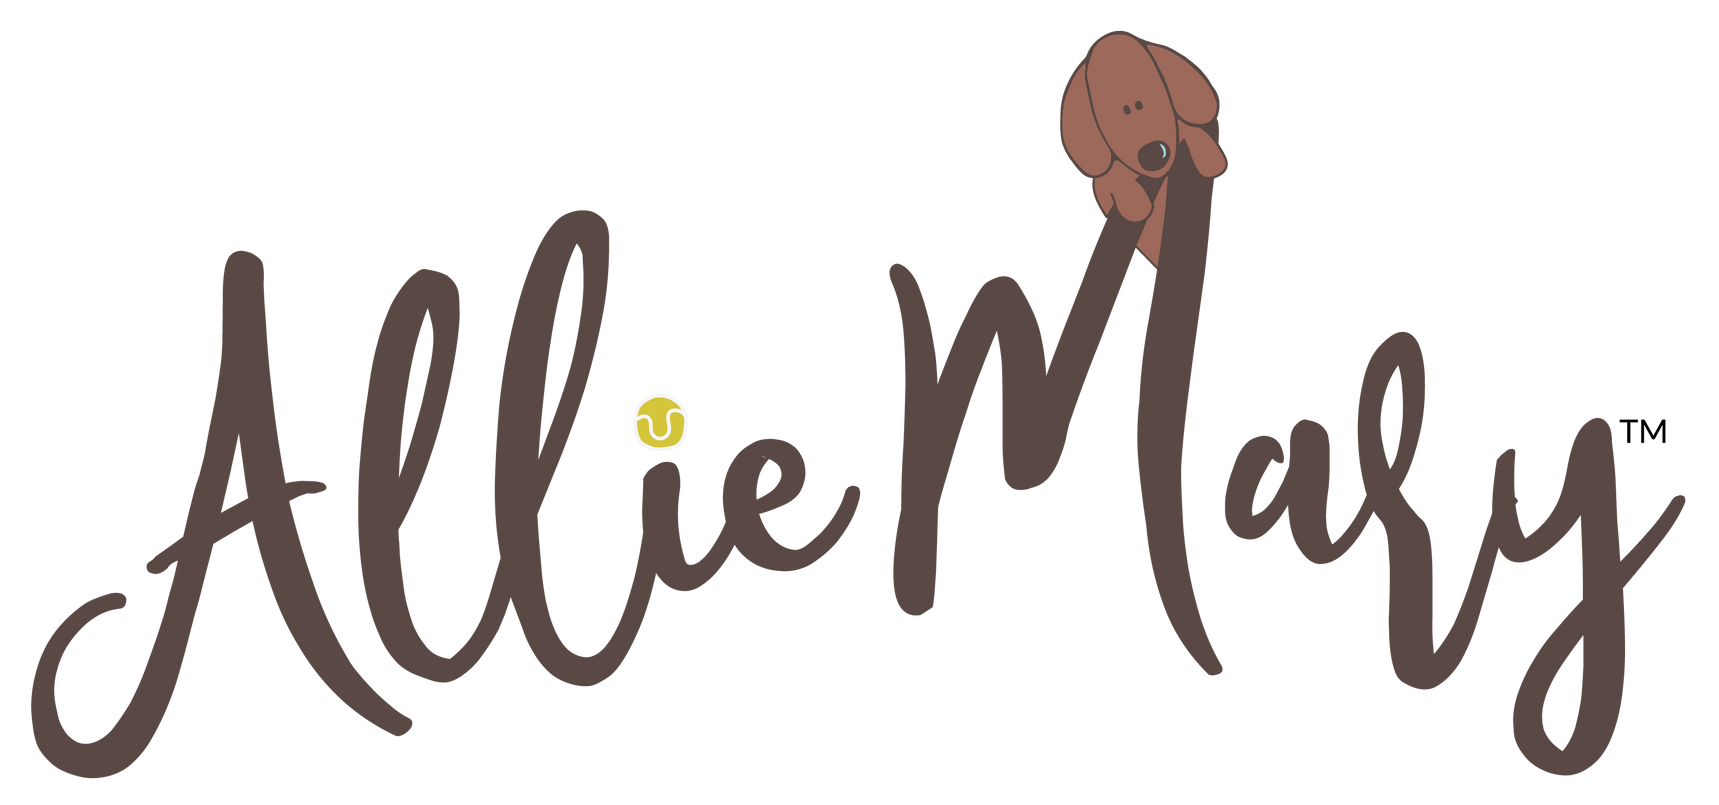 It is a logo for a company called allie mary.